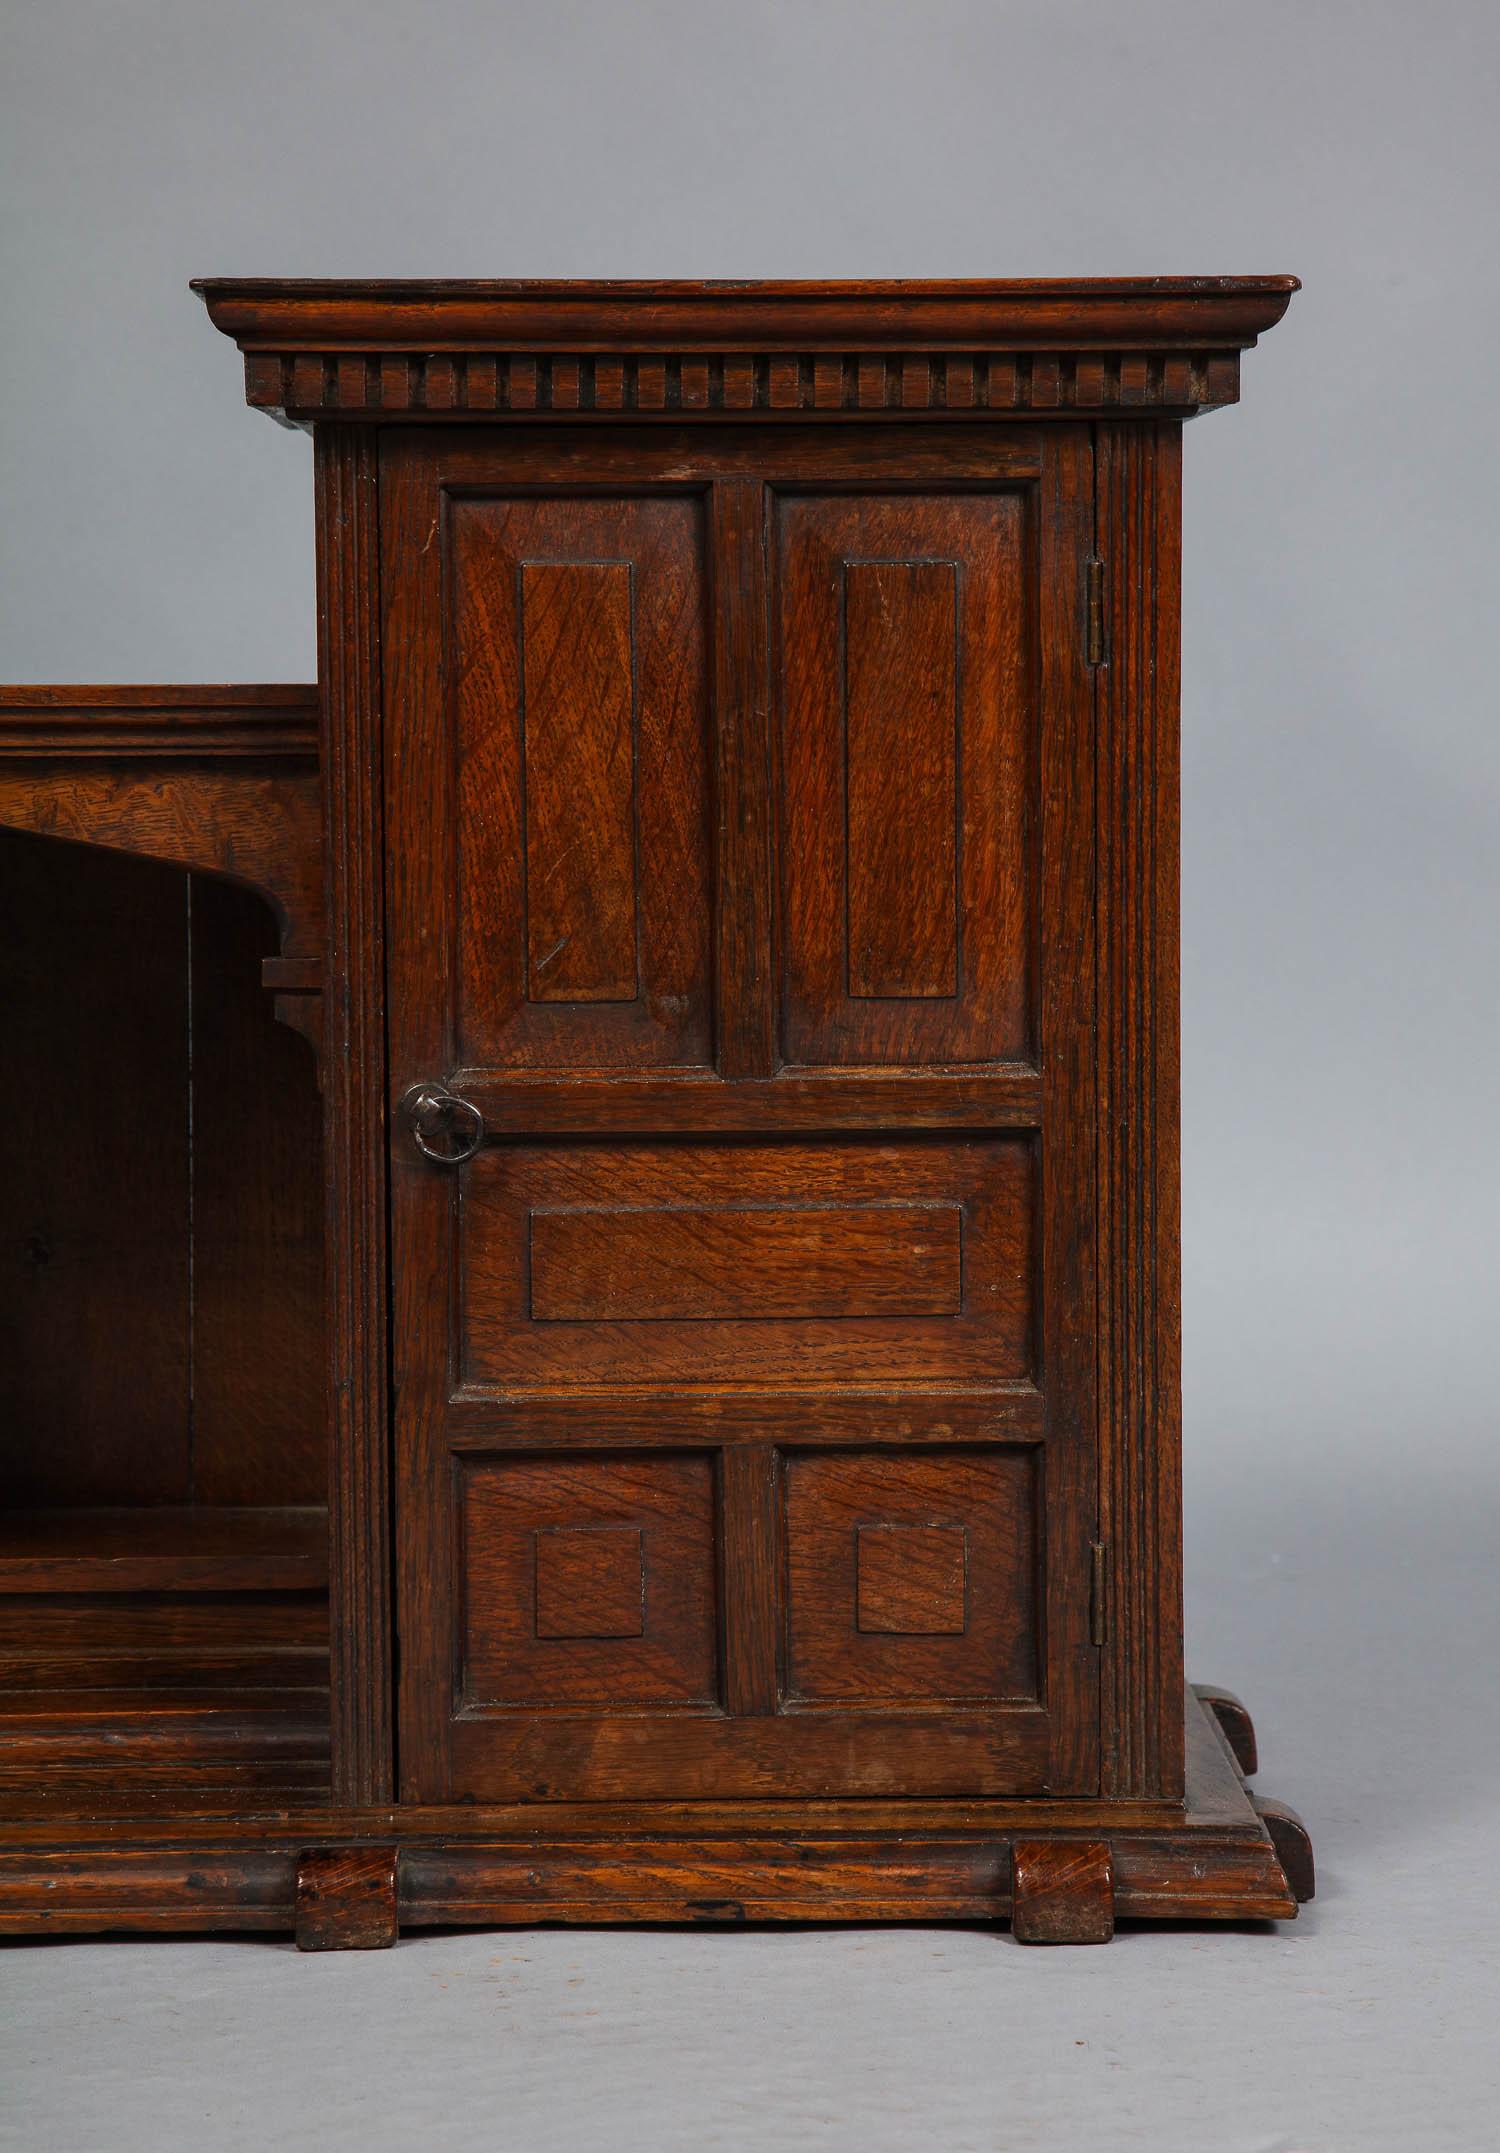 Fine late 19th century English oak hanging or desk cabinet, having two cupboards with paneled doors, dentil molding, and interior shelf flanking open niche with arched cubby, the whole of fine quality. This cabinet would function well either mounted